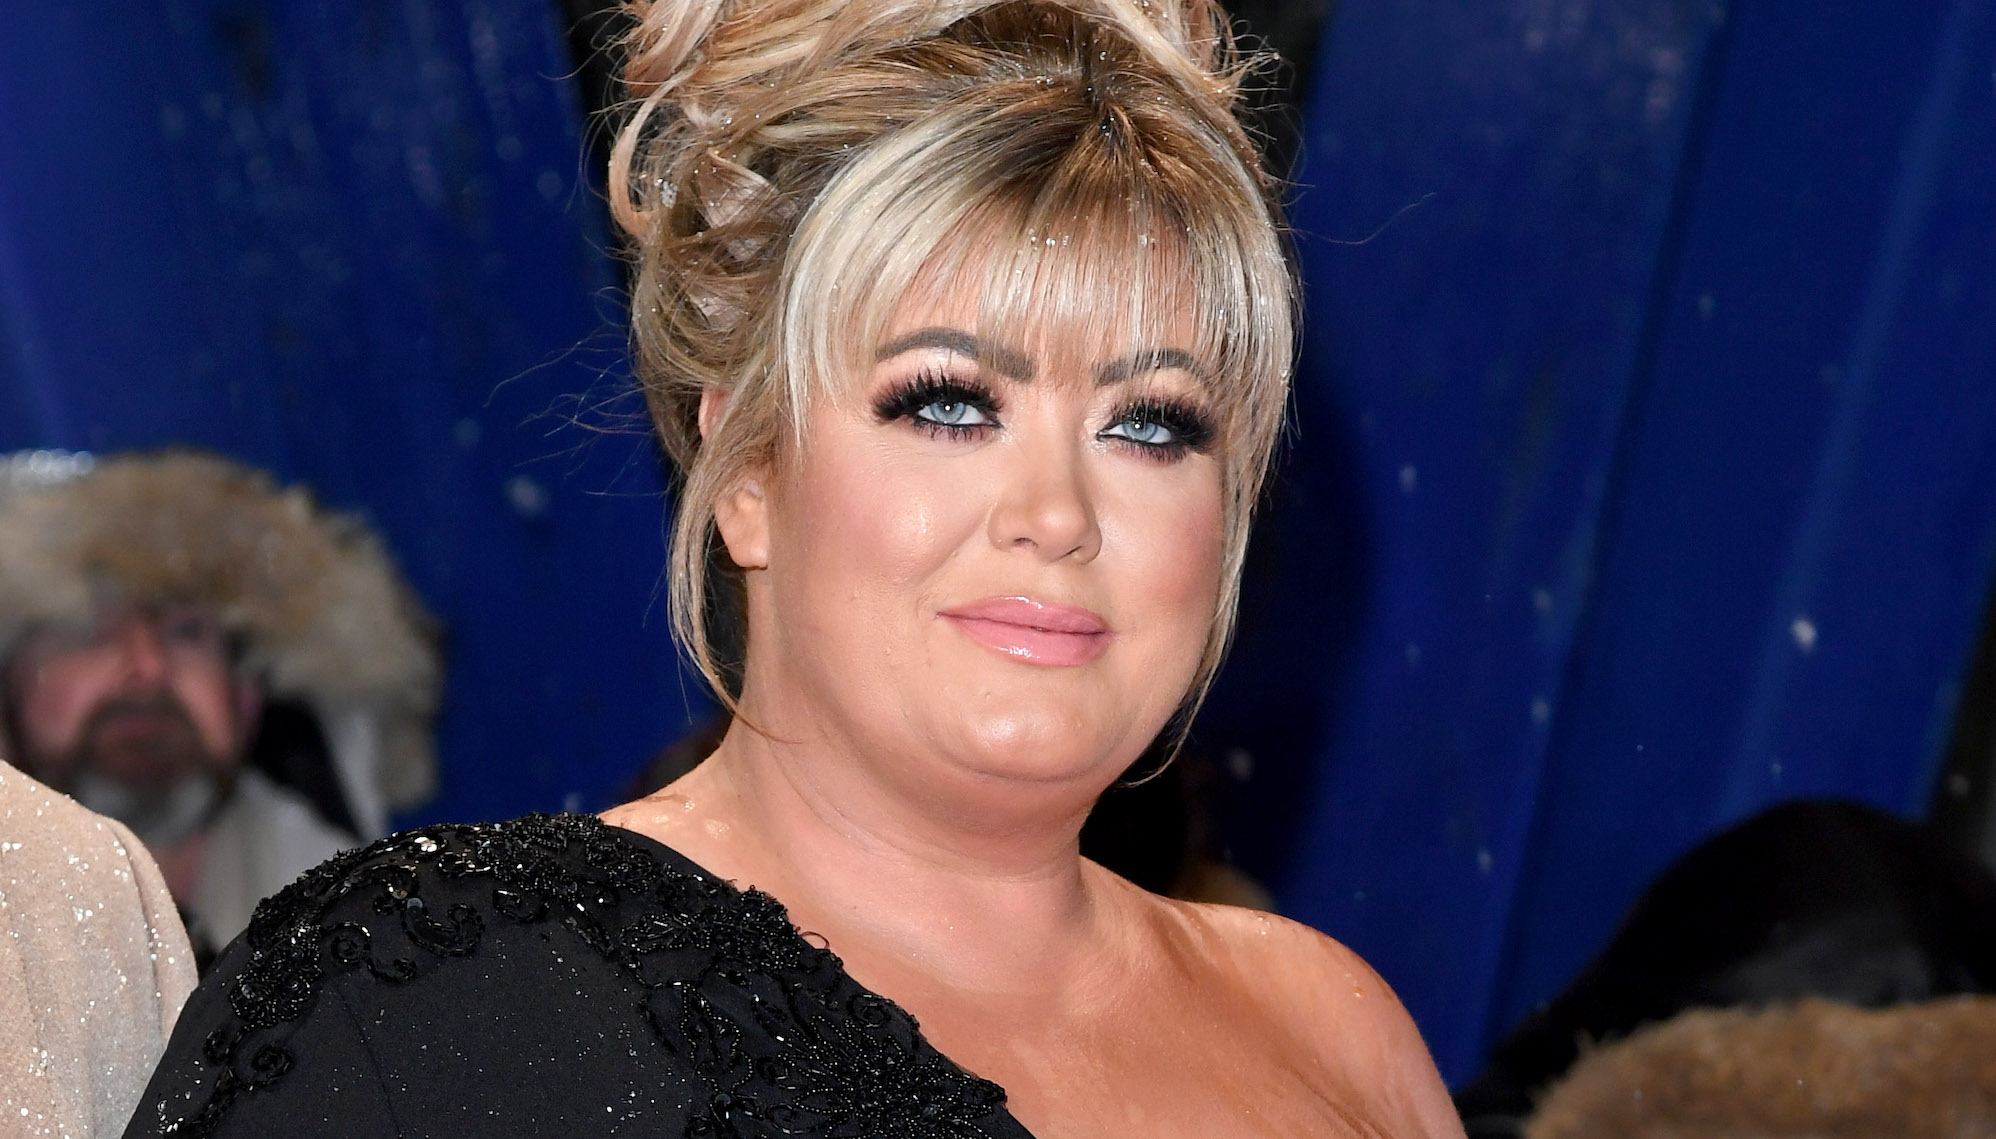 Gemma Collins boldly defied doctors' advice.